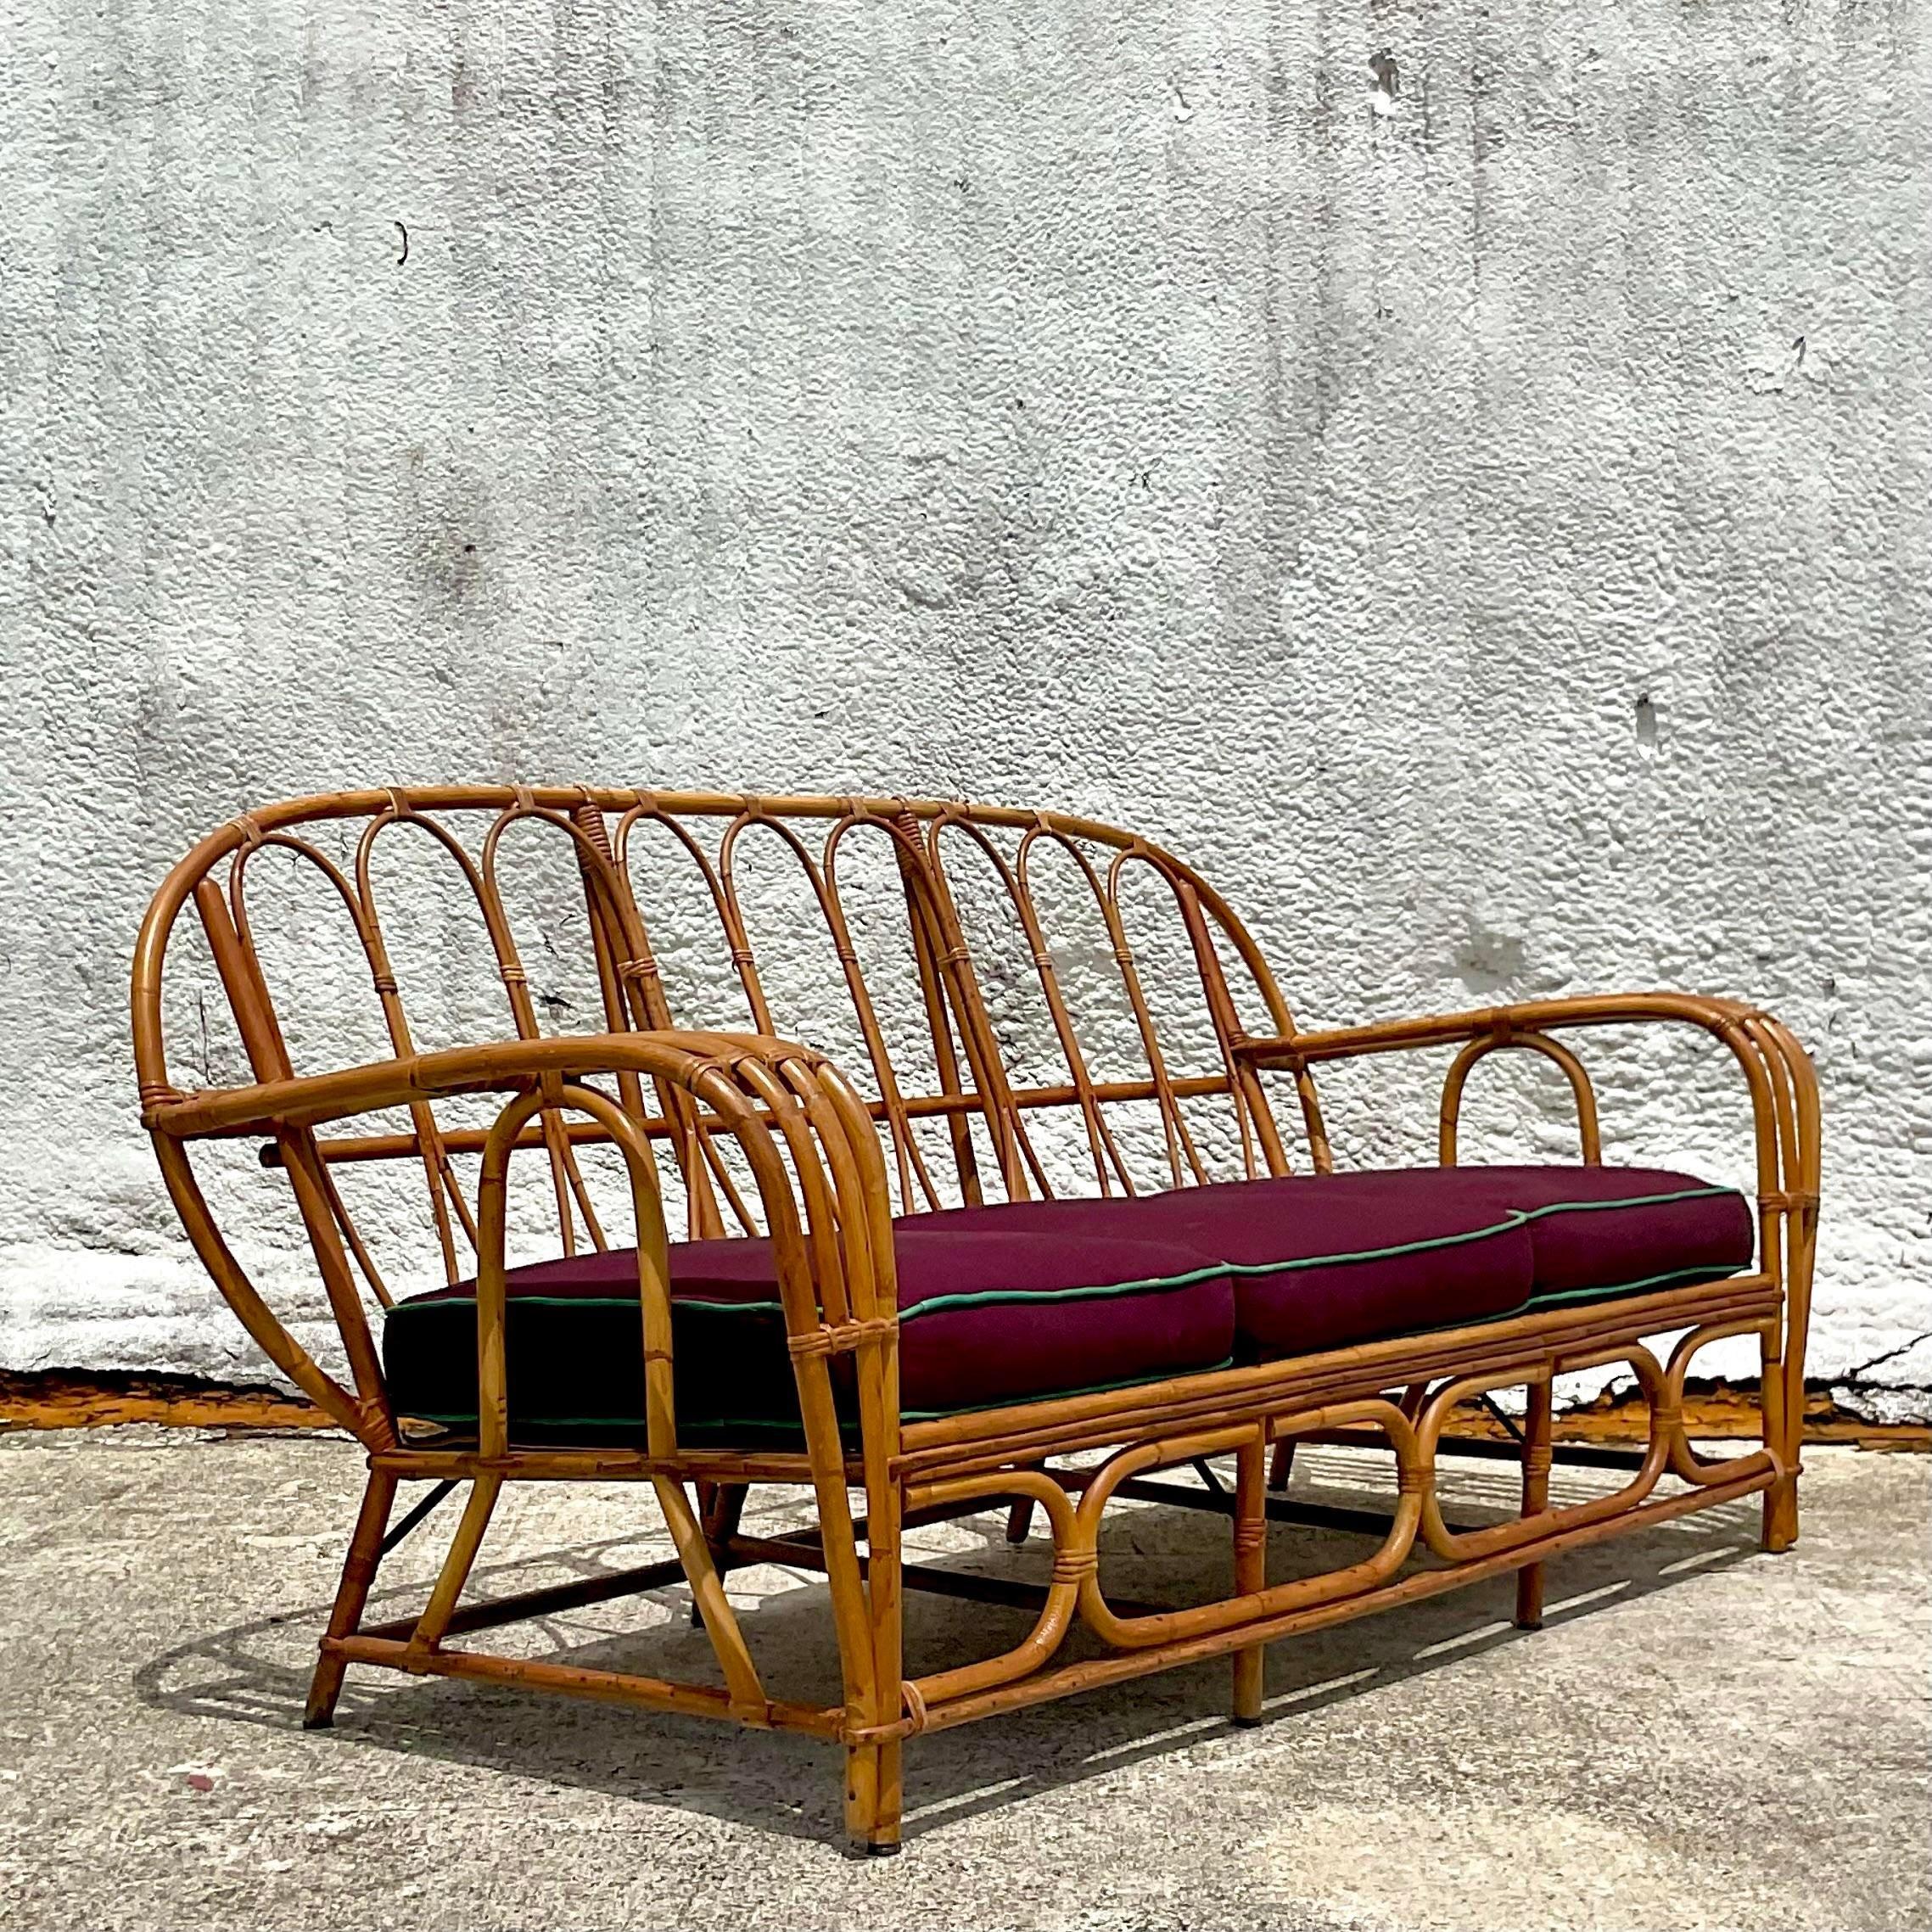 A fabulous vintage Coastal sofa. A chic bent rattan in a cool loop design. Great cushions in a deep aubergine color with a jade tipping.